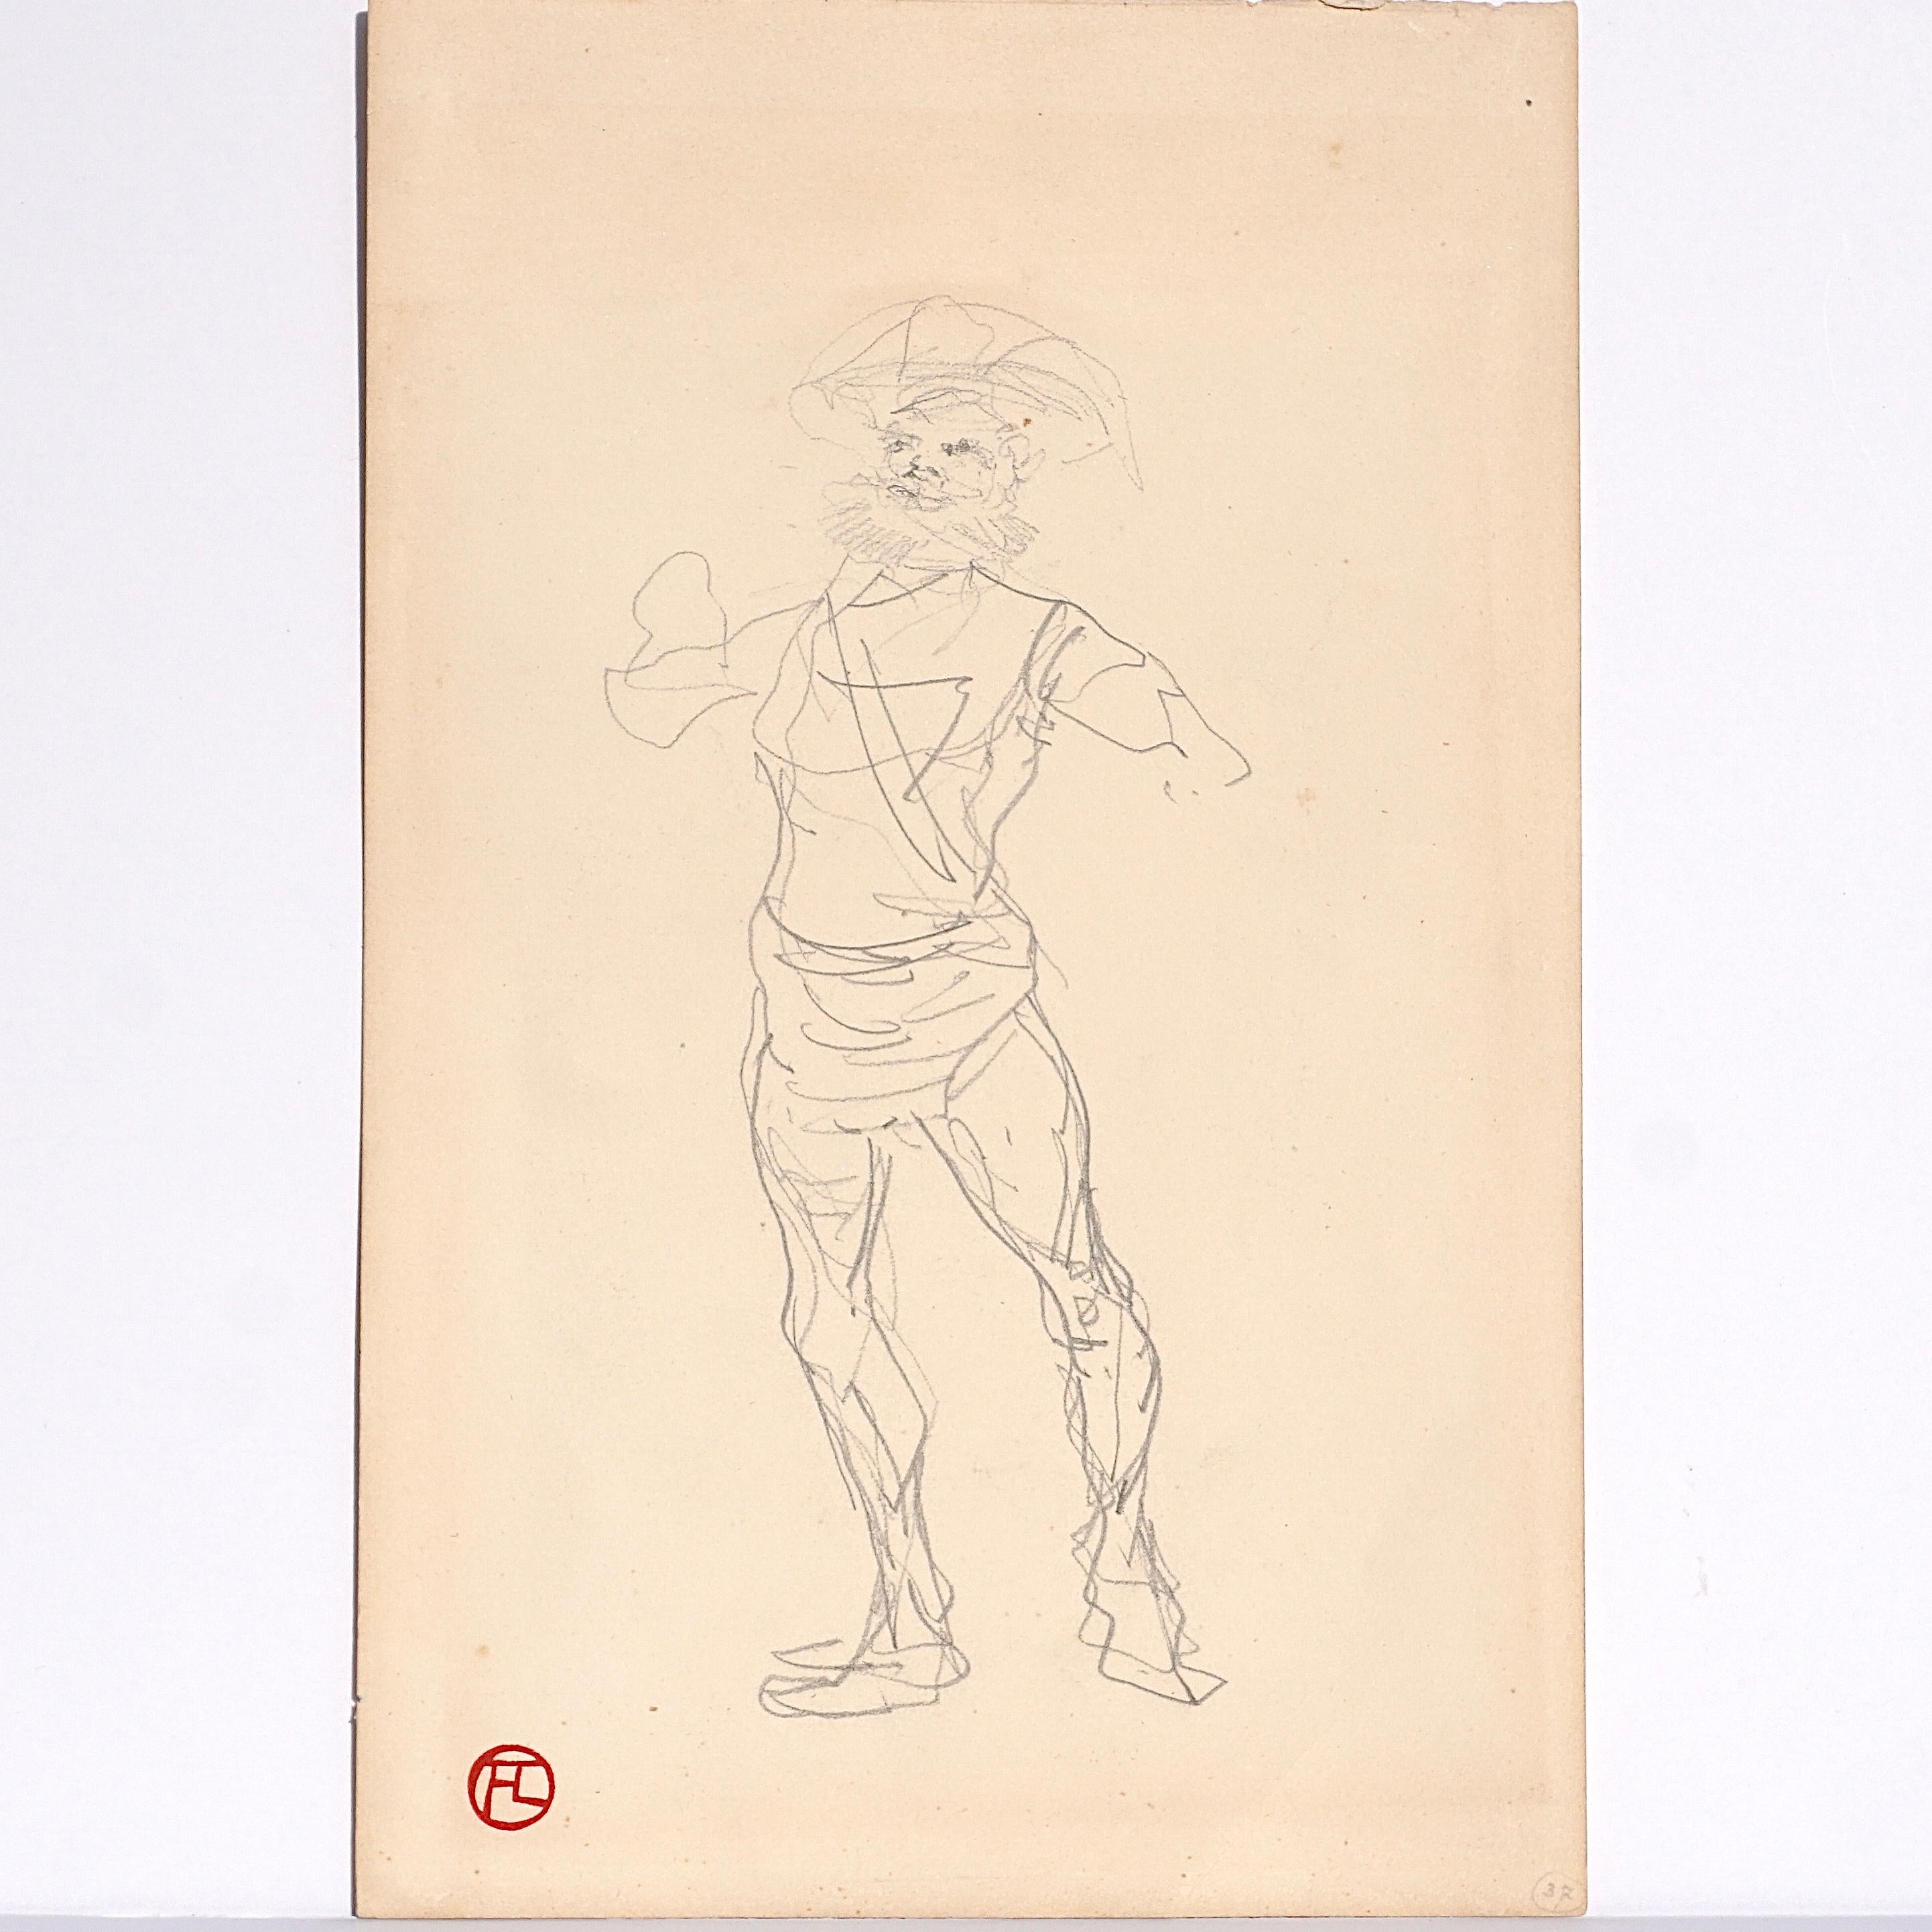 Henri de Toulouse-Lautrec (French, 1864-1901) two sided sketchbook page catalogued in The Catalogue Raisonne.
Homme debout (recto); Croquis (verso) (two-sided drawing) 
circa 1879-1881
Graphite on paper
10.6 x 6.72 inches (27 x 17.1 cm)